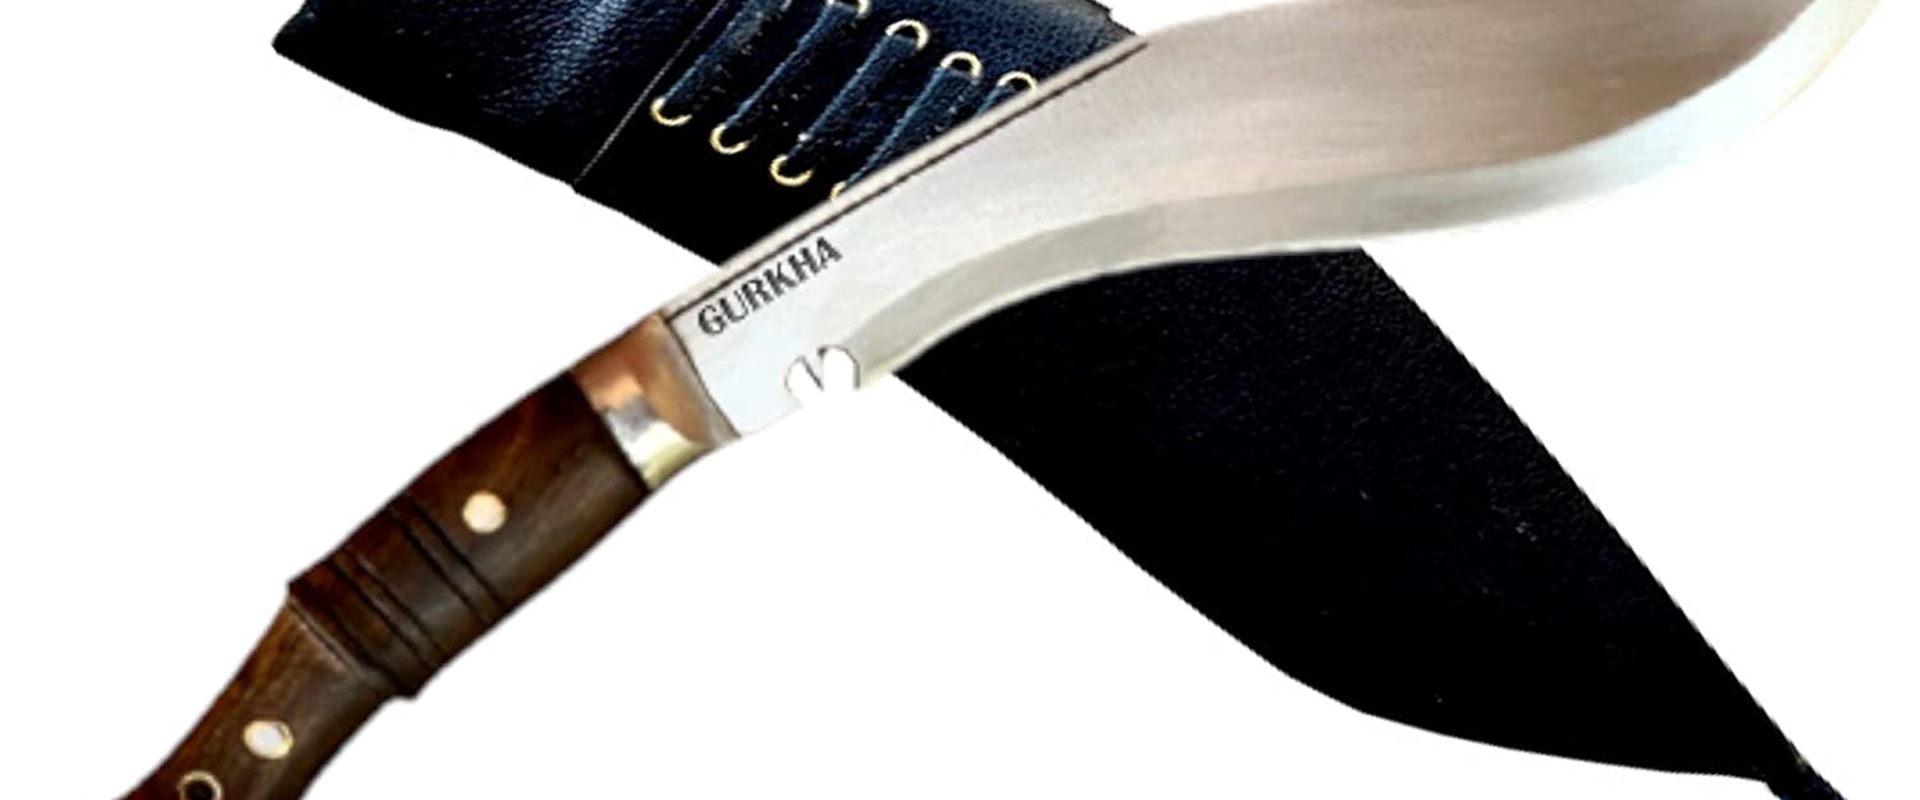 What is the most popular knife in the world?